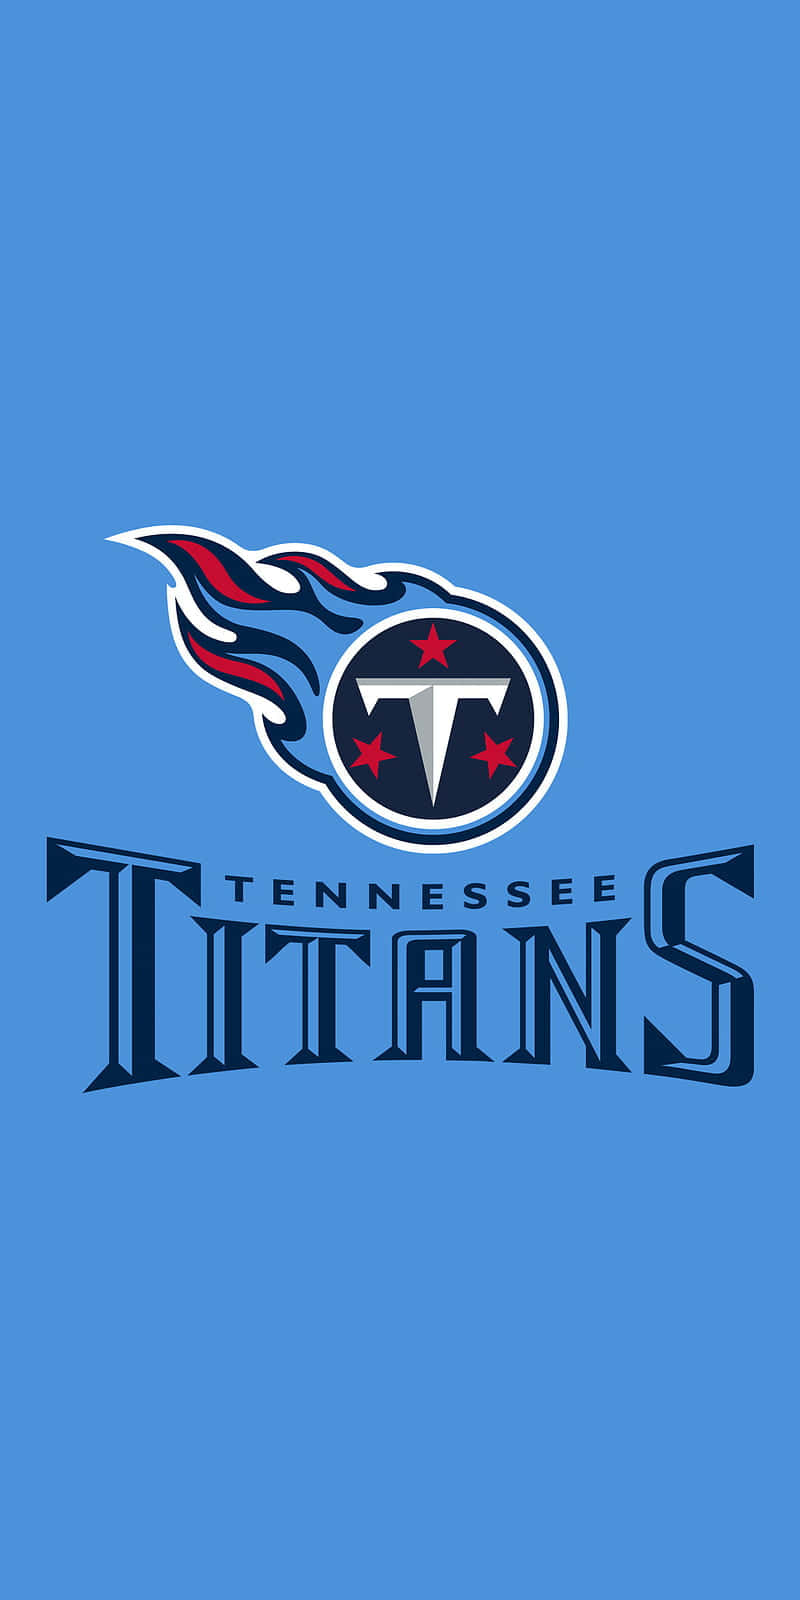 Get Ready to Show Your Titans Pride with Our Official Tennessee Titans iPhone Cases Wallpaper